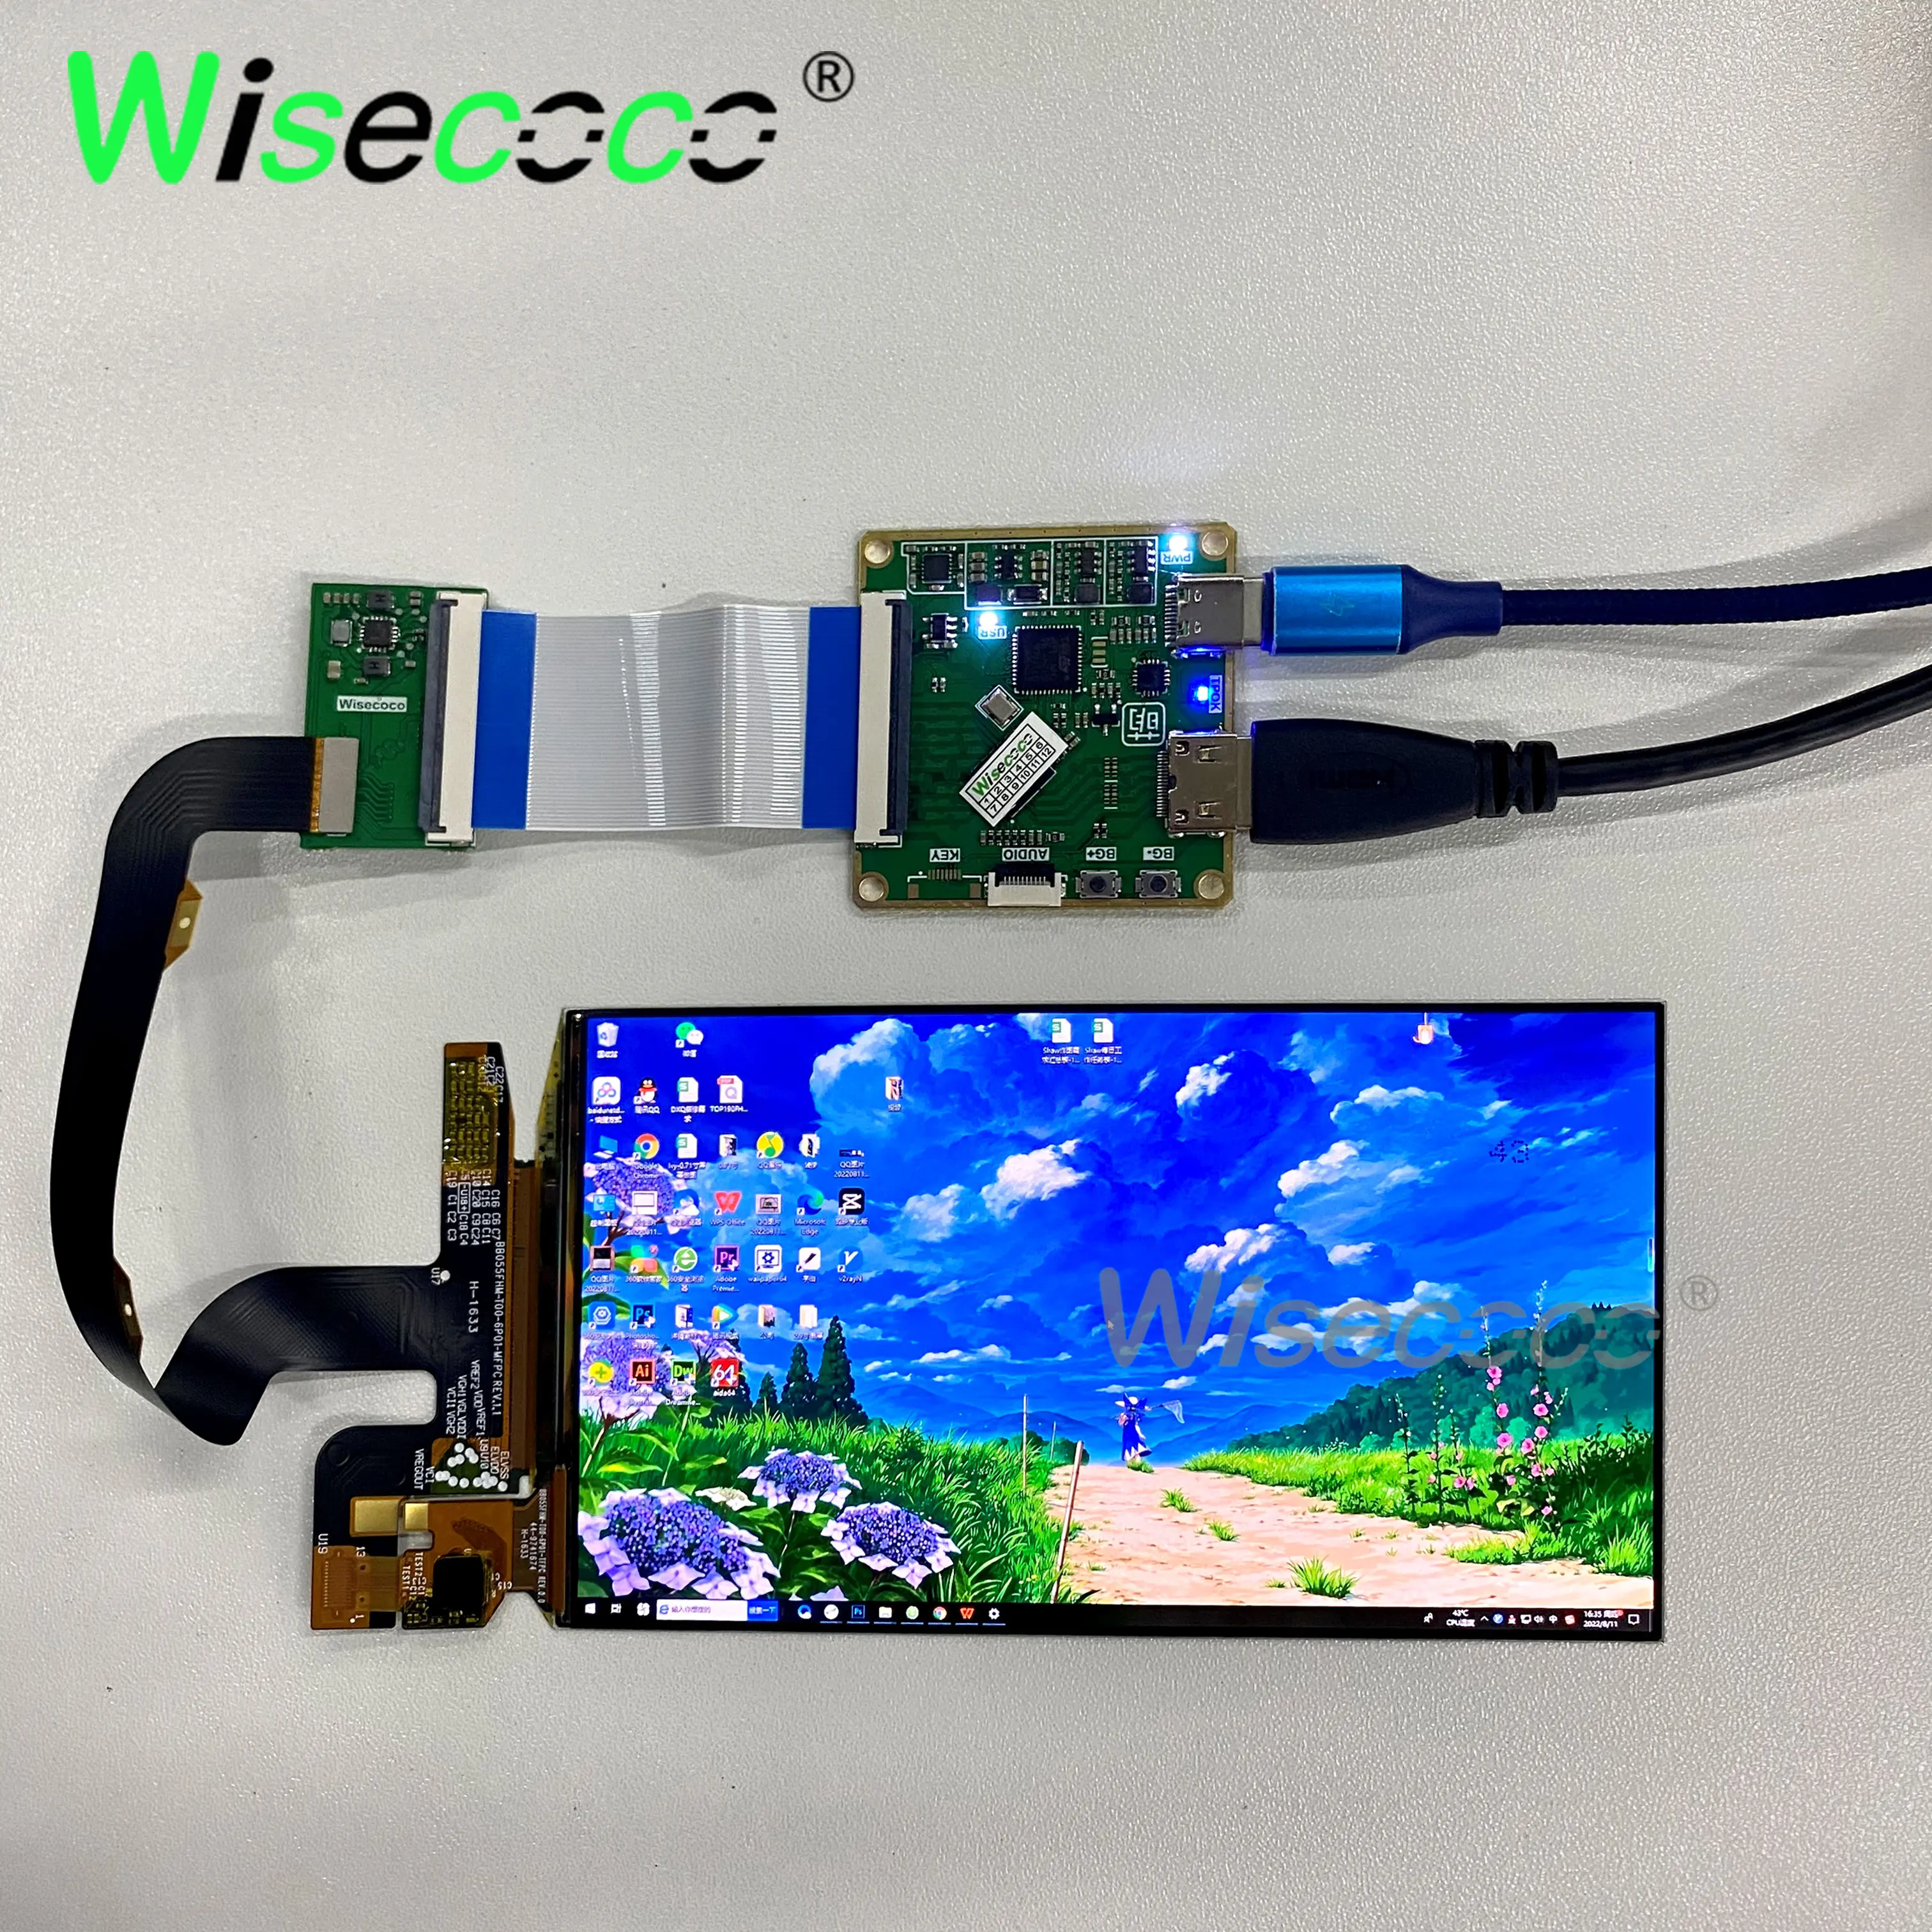 OLED 5.5 INCH 1920x1080 TOUCH SCREEN FHD AMOLED SCREEN DISPLAY 60Hz USB-C DRIVER BOARD RASPBERRY PI WIN 10 11 OLED TOUCH PANEL